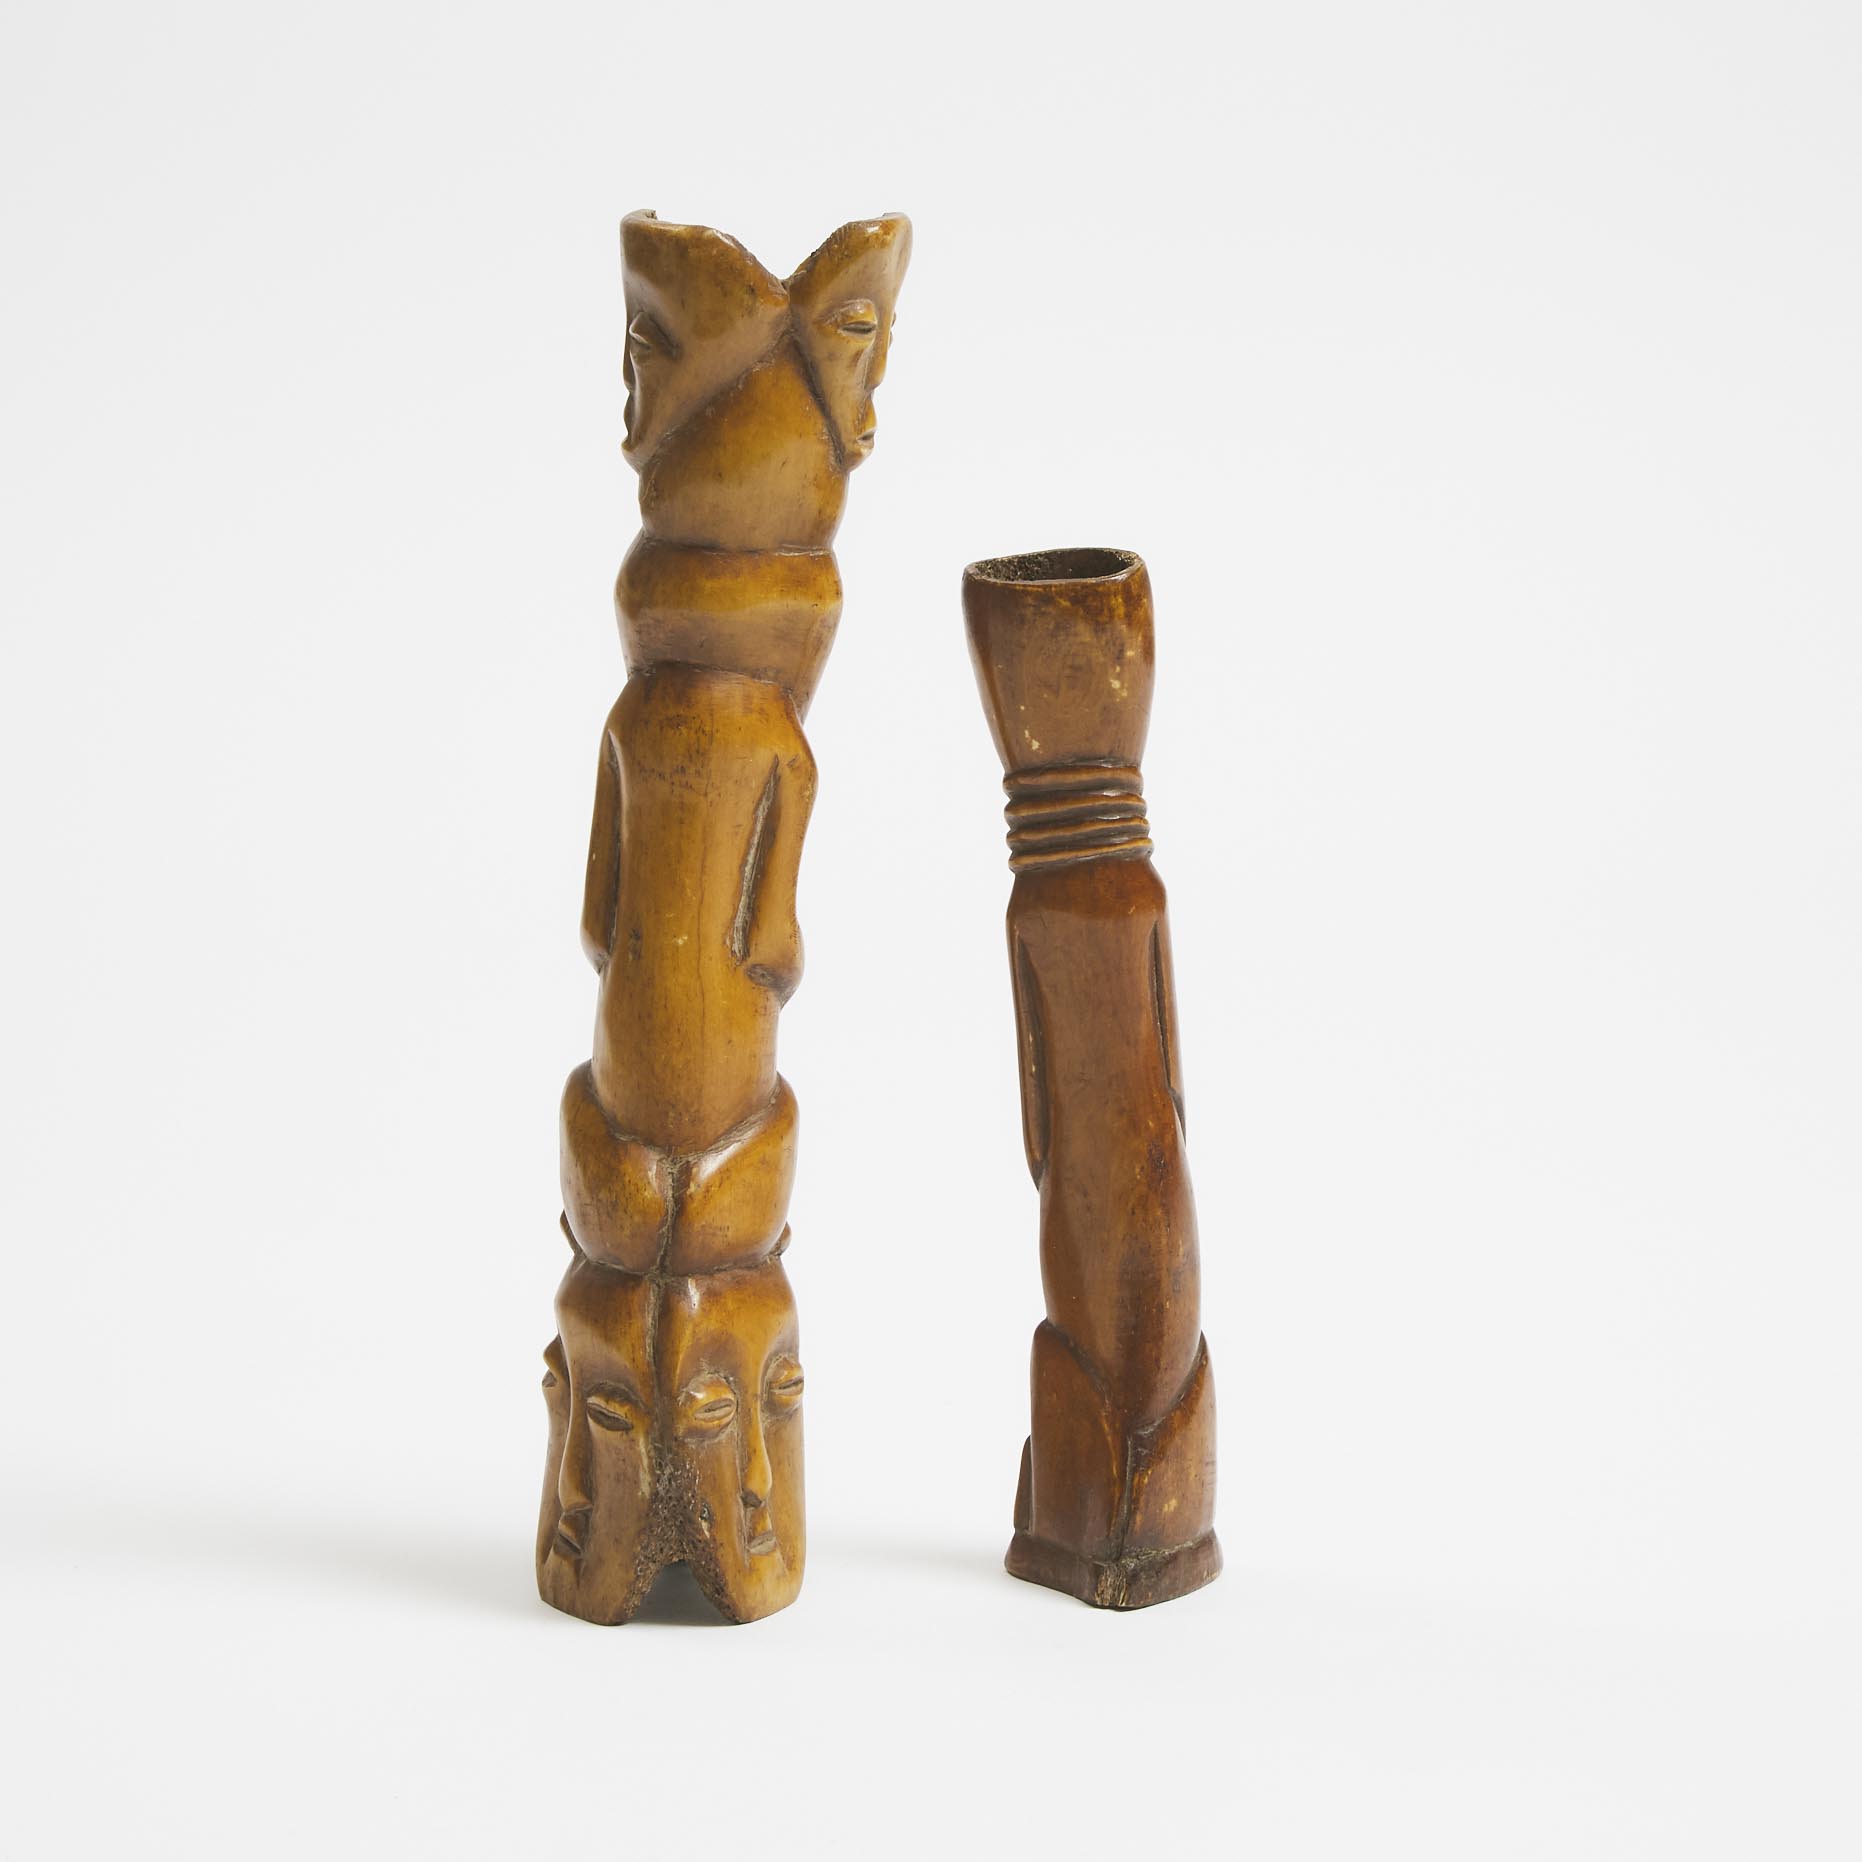 Lega Carved Bone Totem and Female figure, Democratic Republic of Congo, Central Africa, late 19th to early 20th century